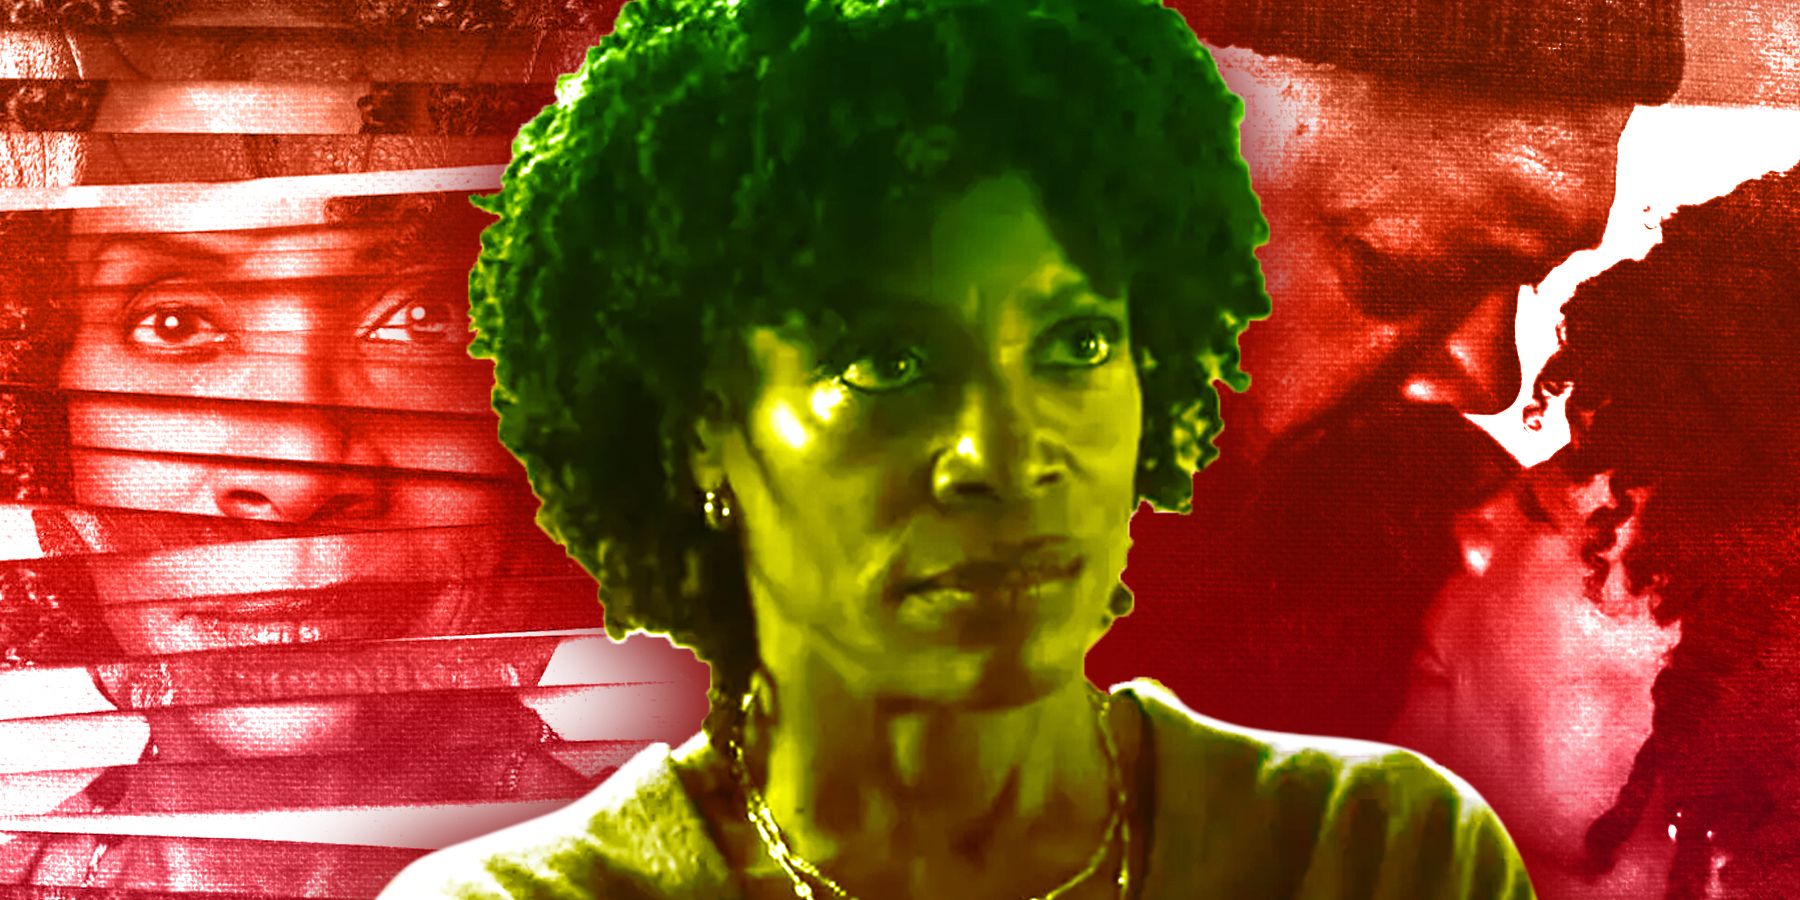 Priscilla as played by Charlayne Woodard and Nick Fury played by Samuel L. Jackson from Marvel's show Secret Invasion